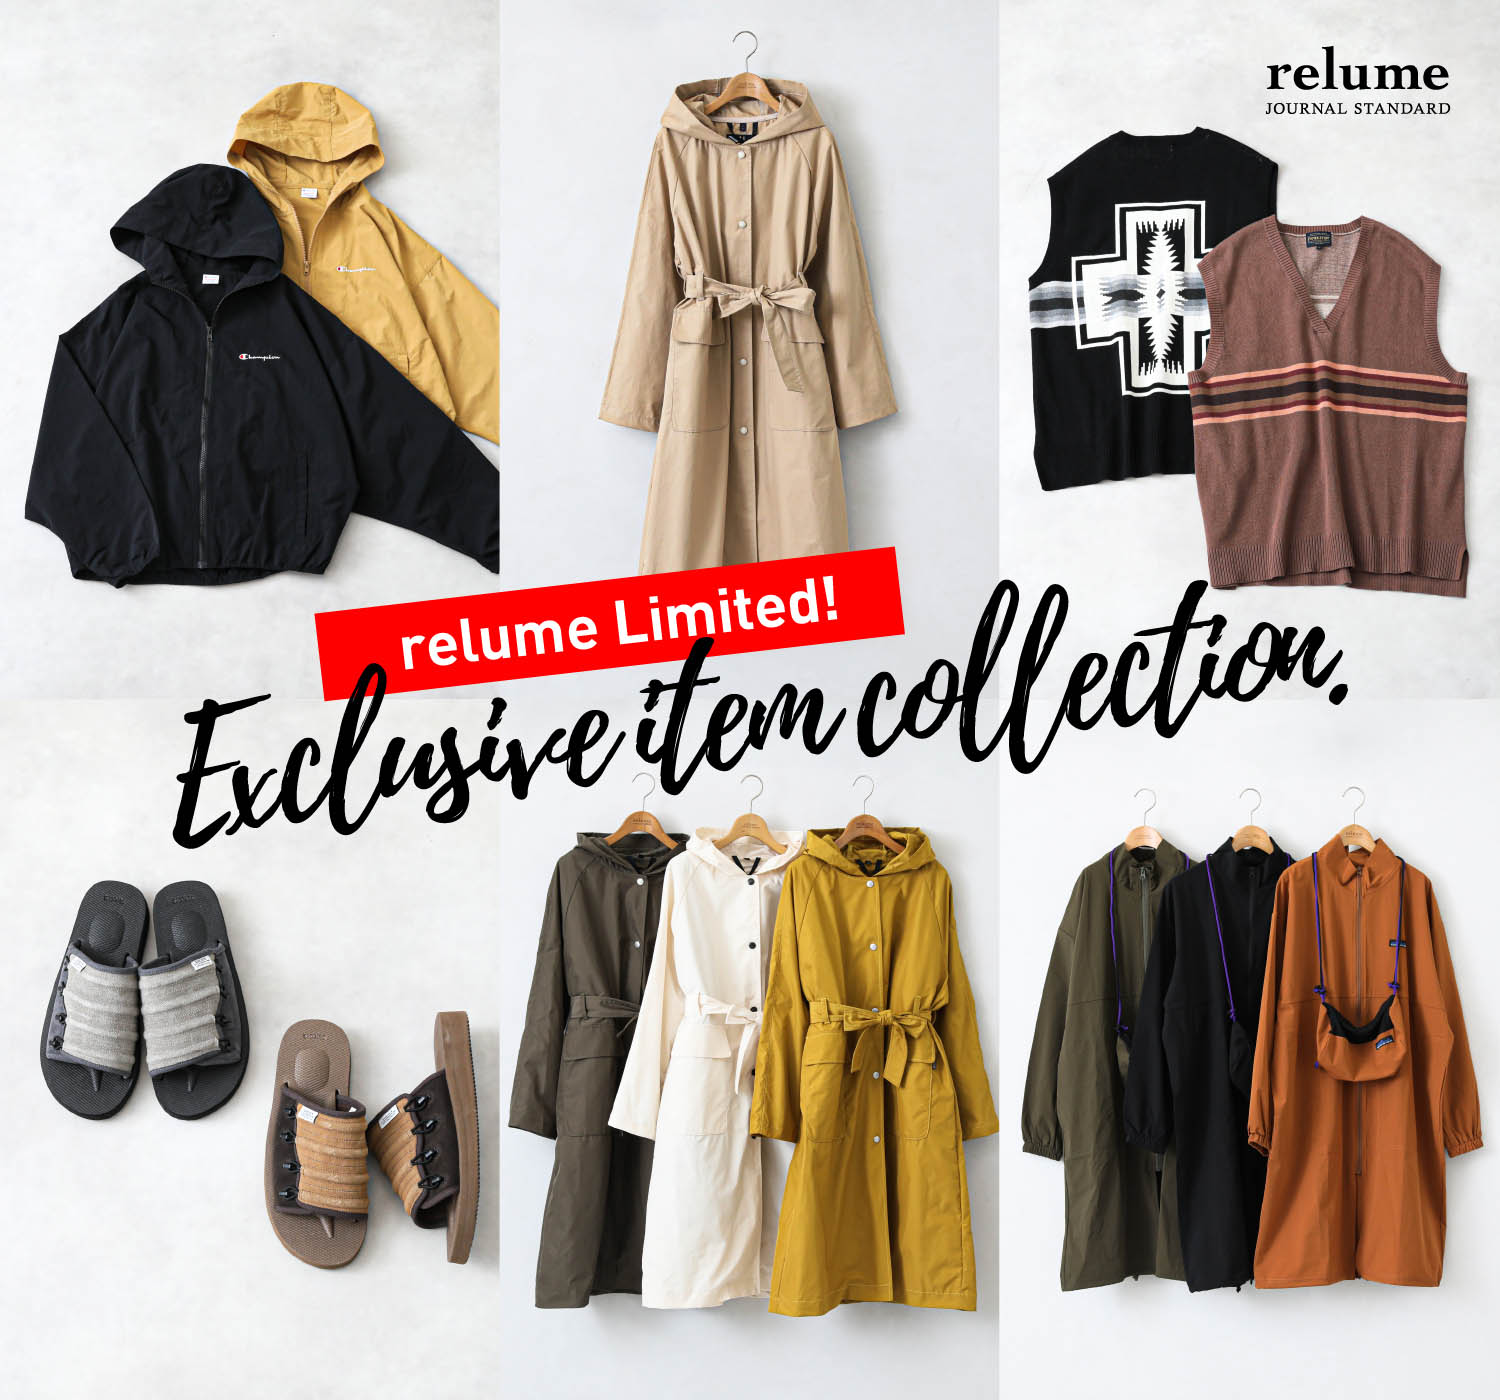 relume LIMITED！EXCLUSIVE ITEM COLLECTION｜JOURNAL STANDARD relume ...